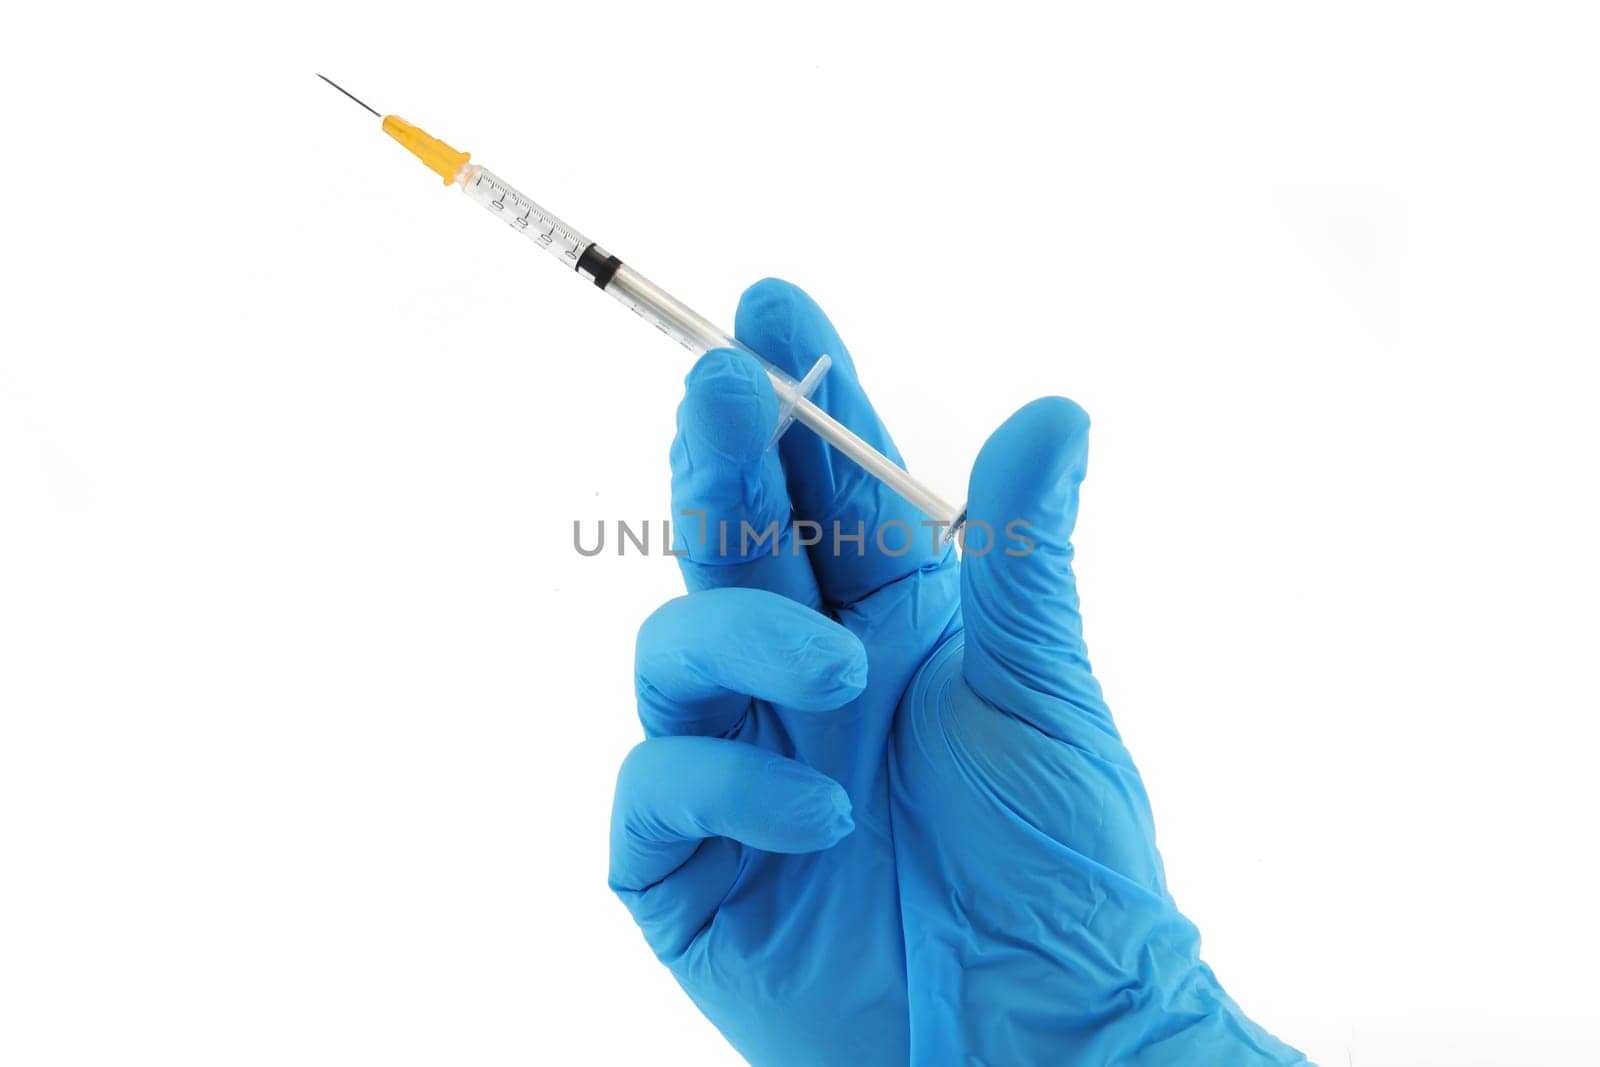 Vaccination syringe and hand in blue surgical glove by VivacityImages